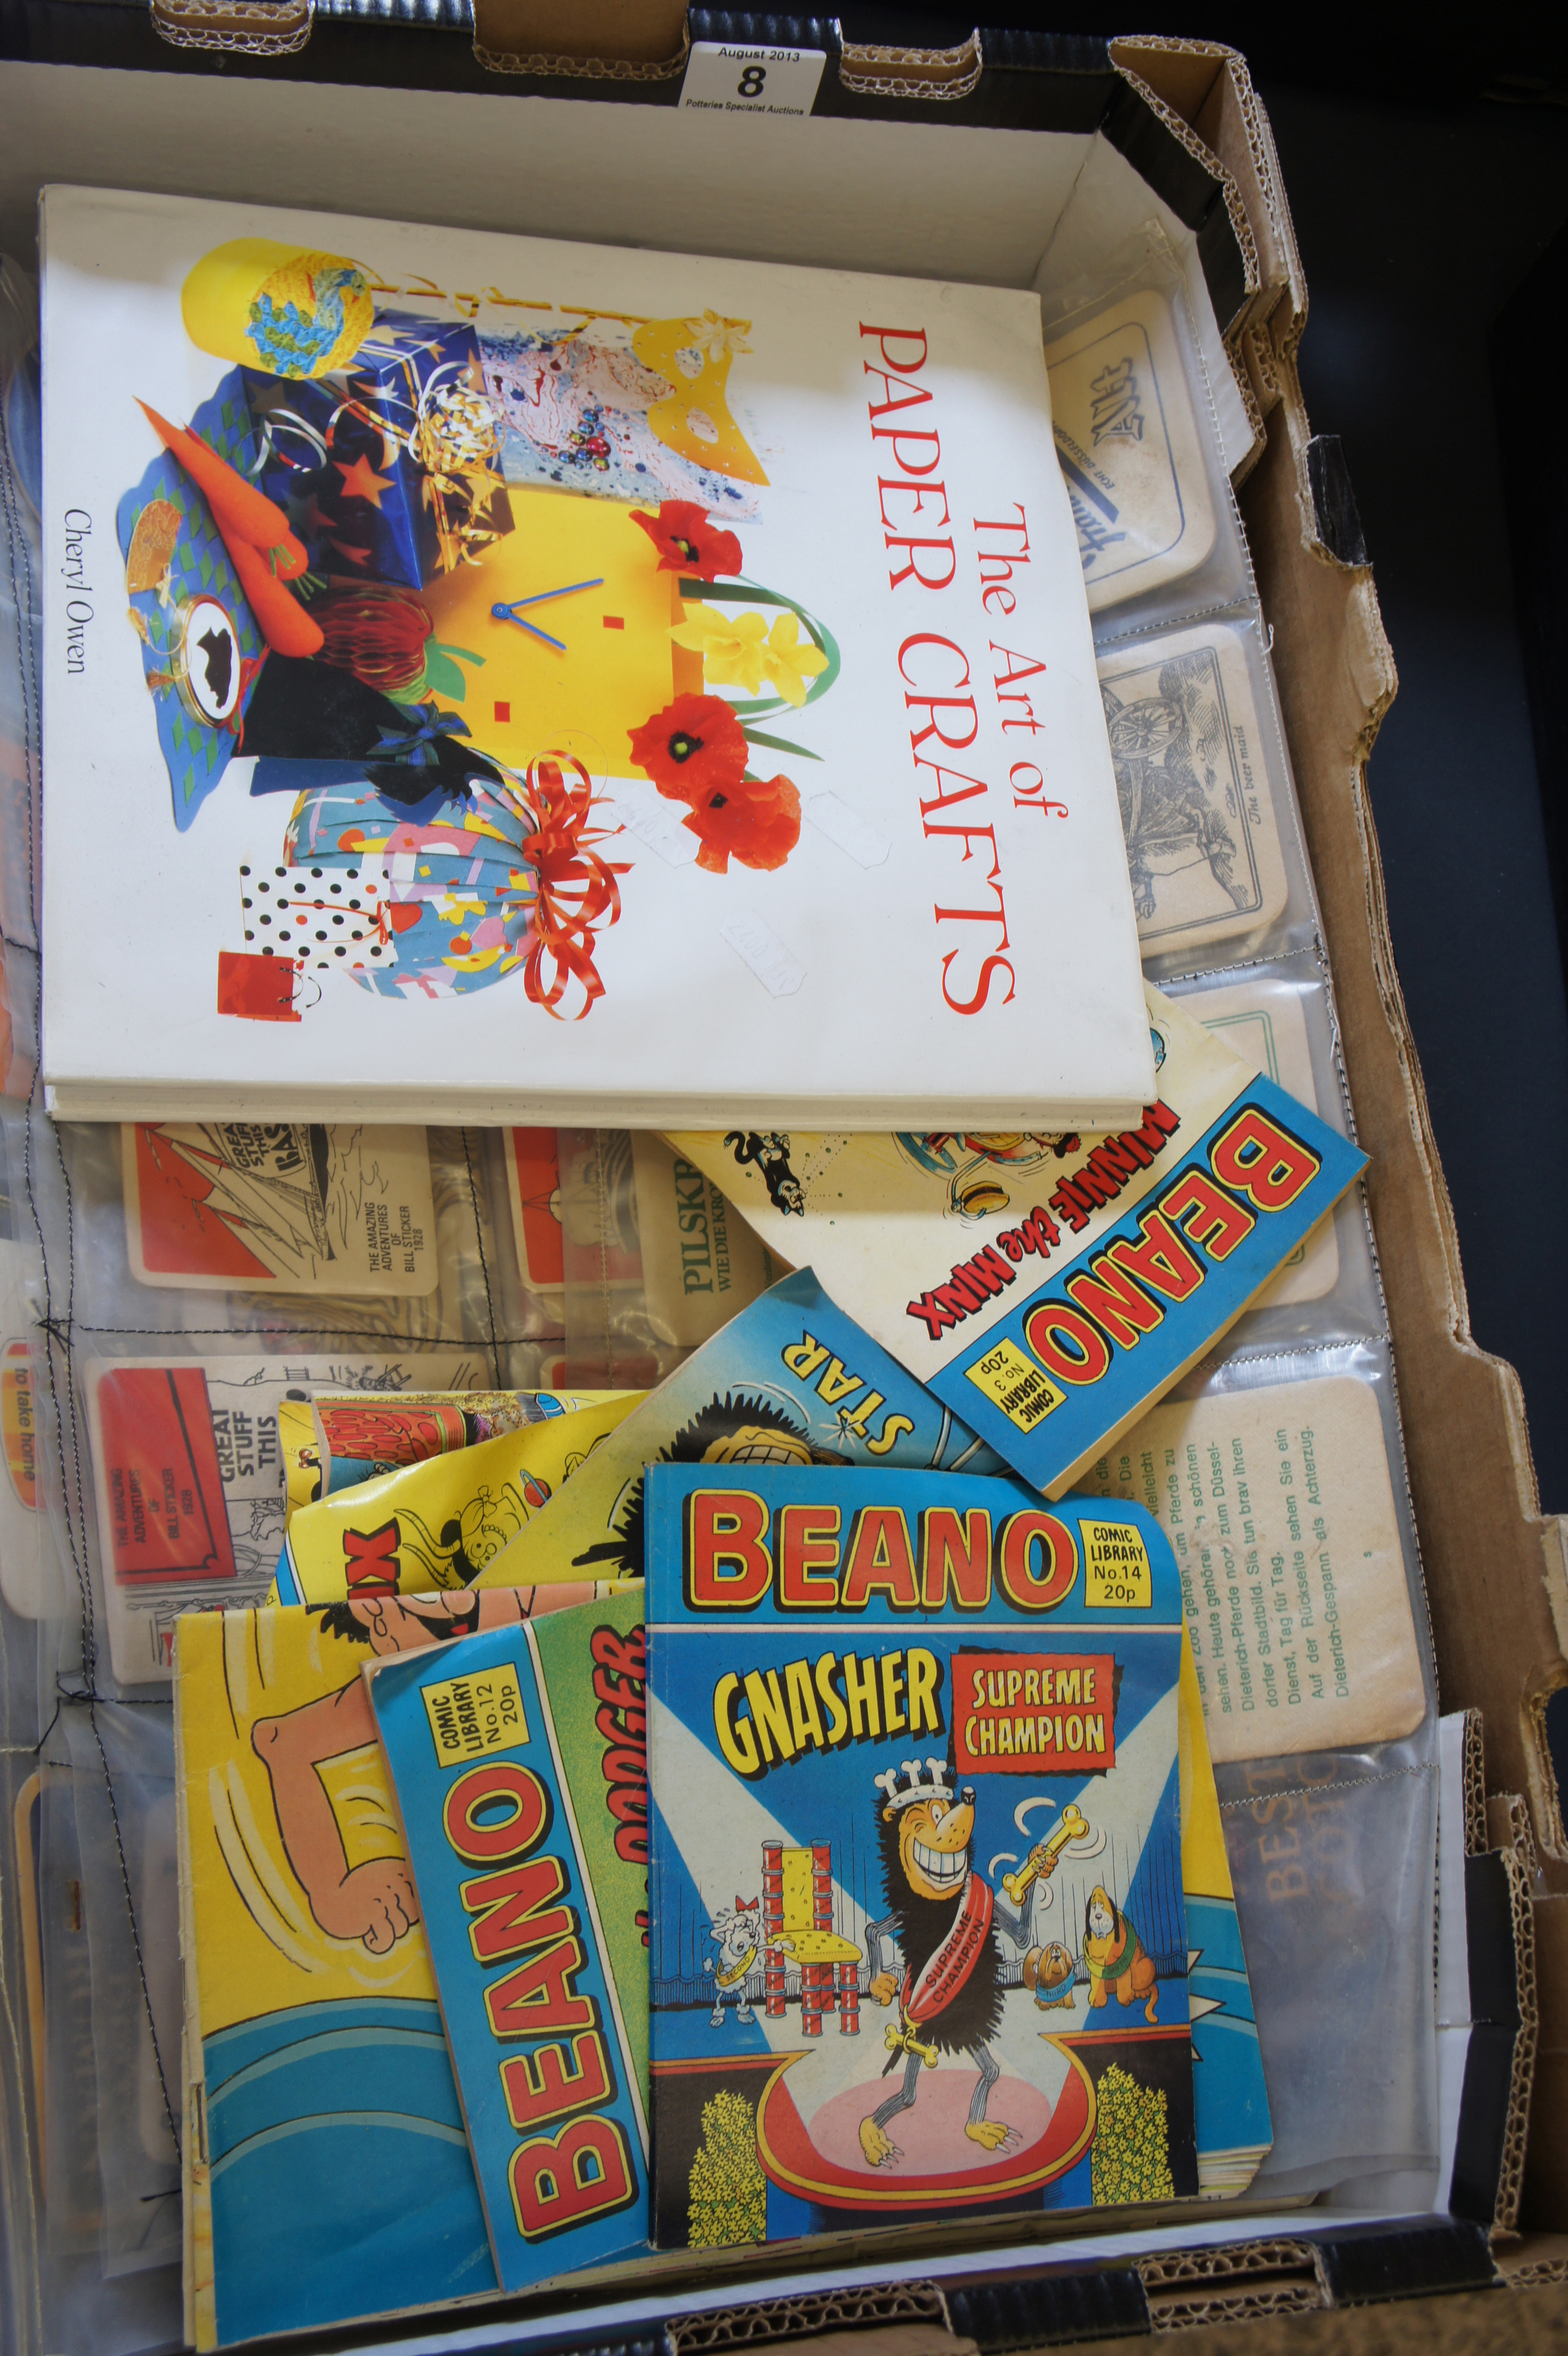 Collection of Old Beano Comics and Beer Mats